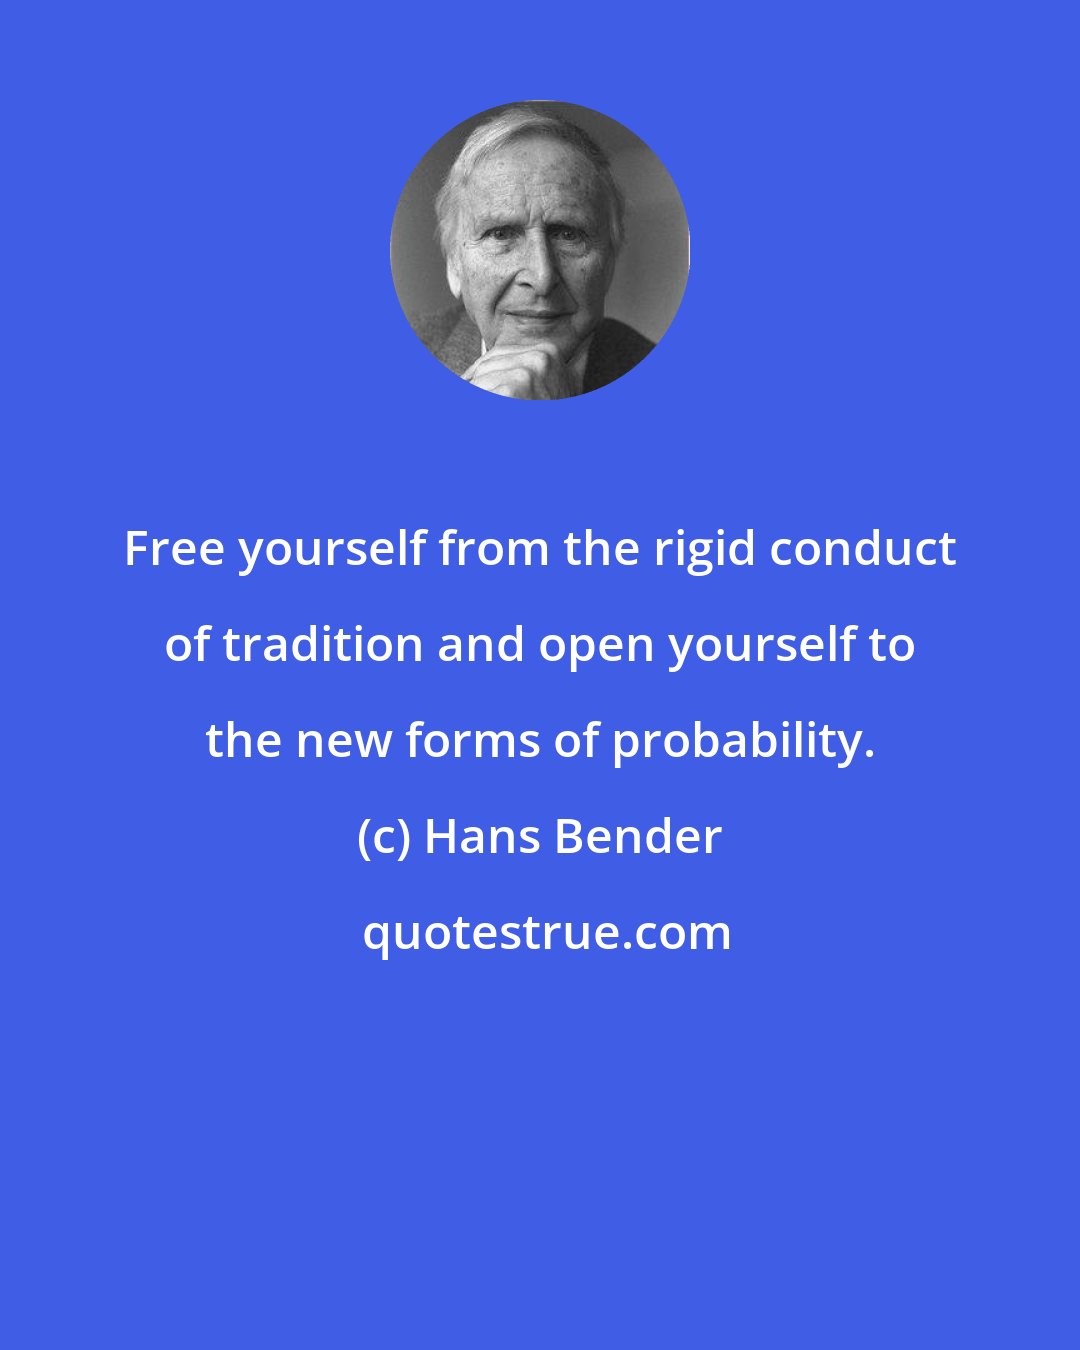 Hans Bender: Free yourself from the rigid conduct of tradition and open yourself to the new forms of probability.